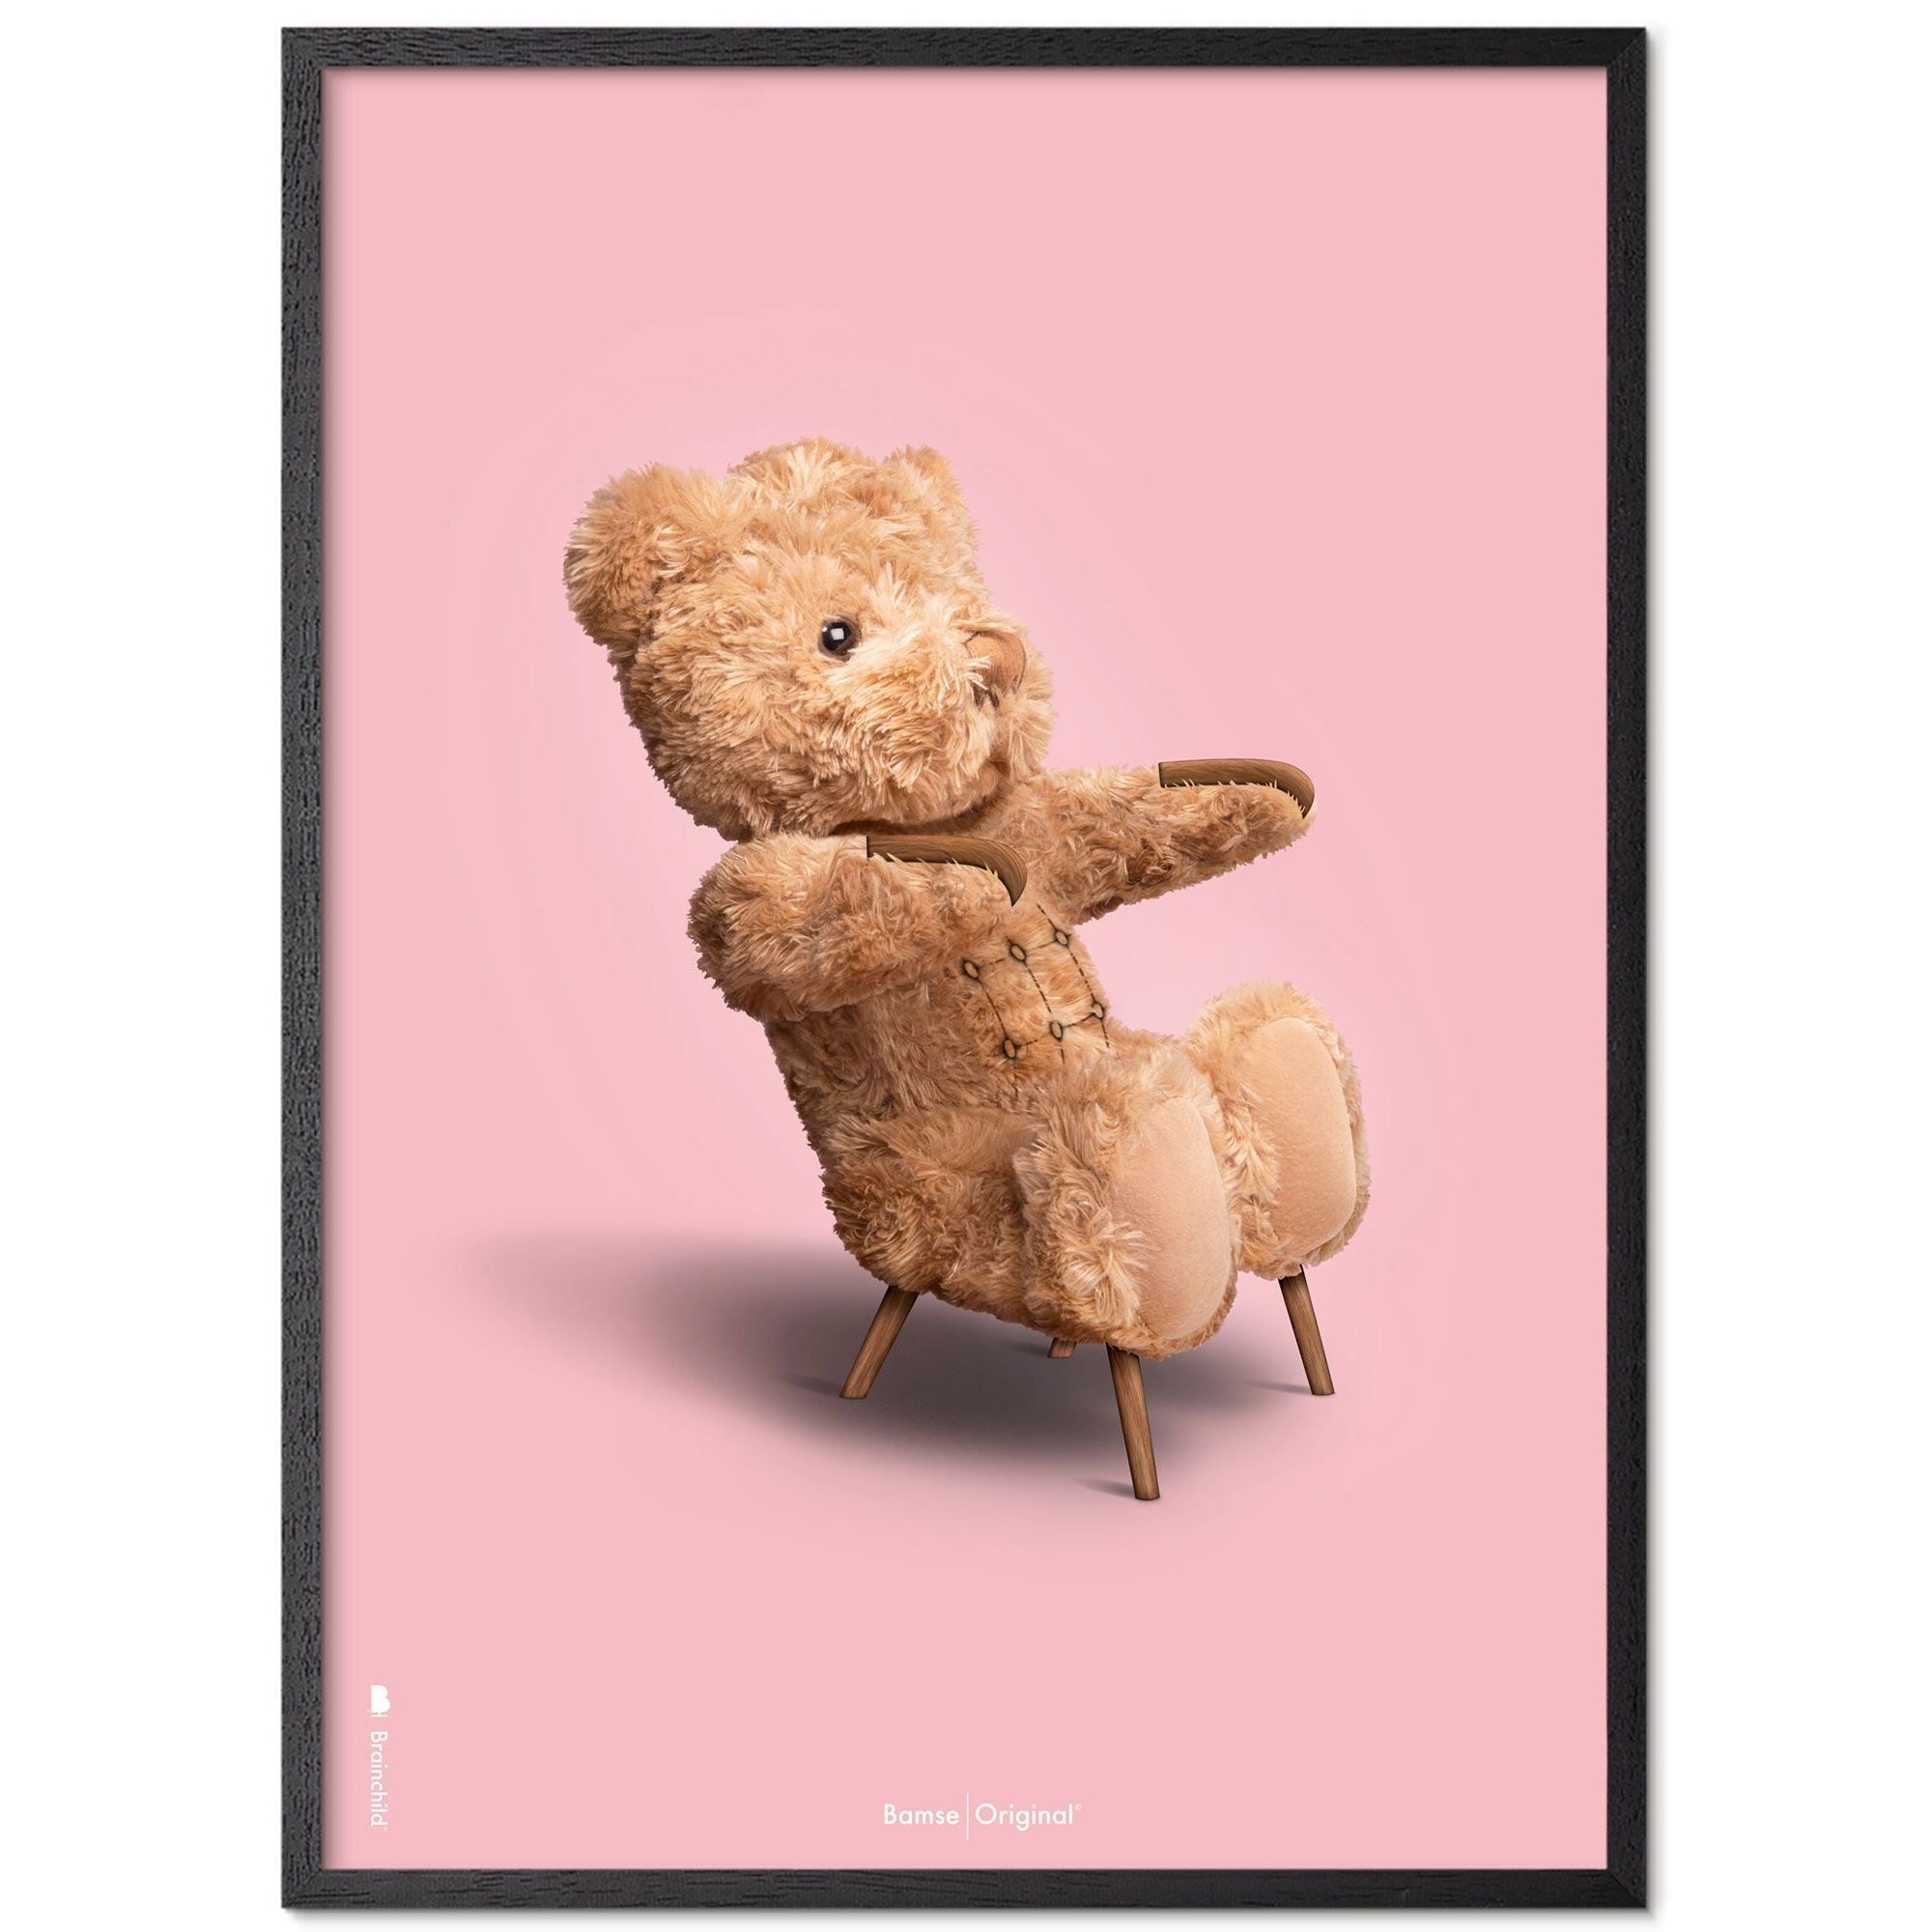 Brainchild Teddy Bear Classic Poster Frame Made Of Black Lacquered Wood 70x100 Cm, Pink Background